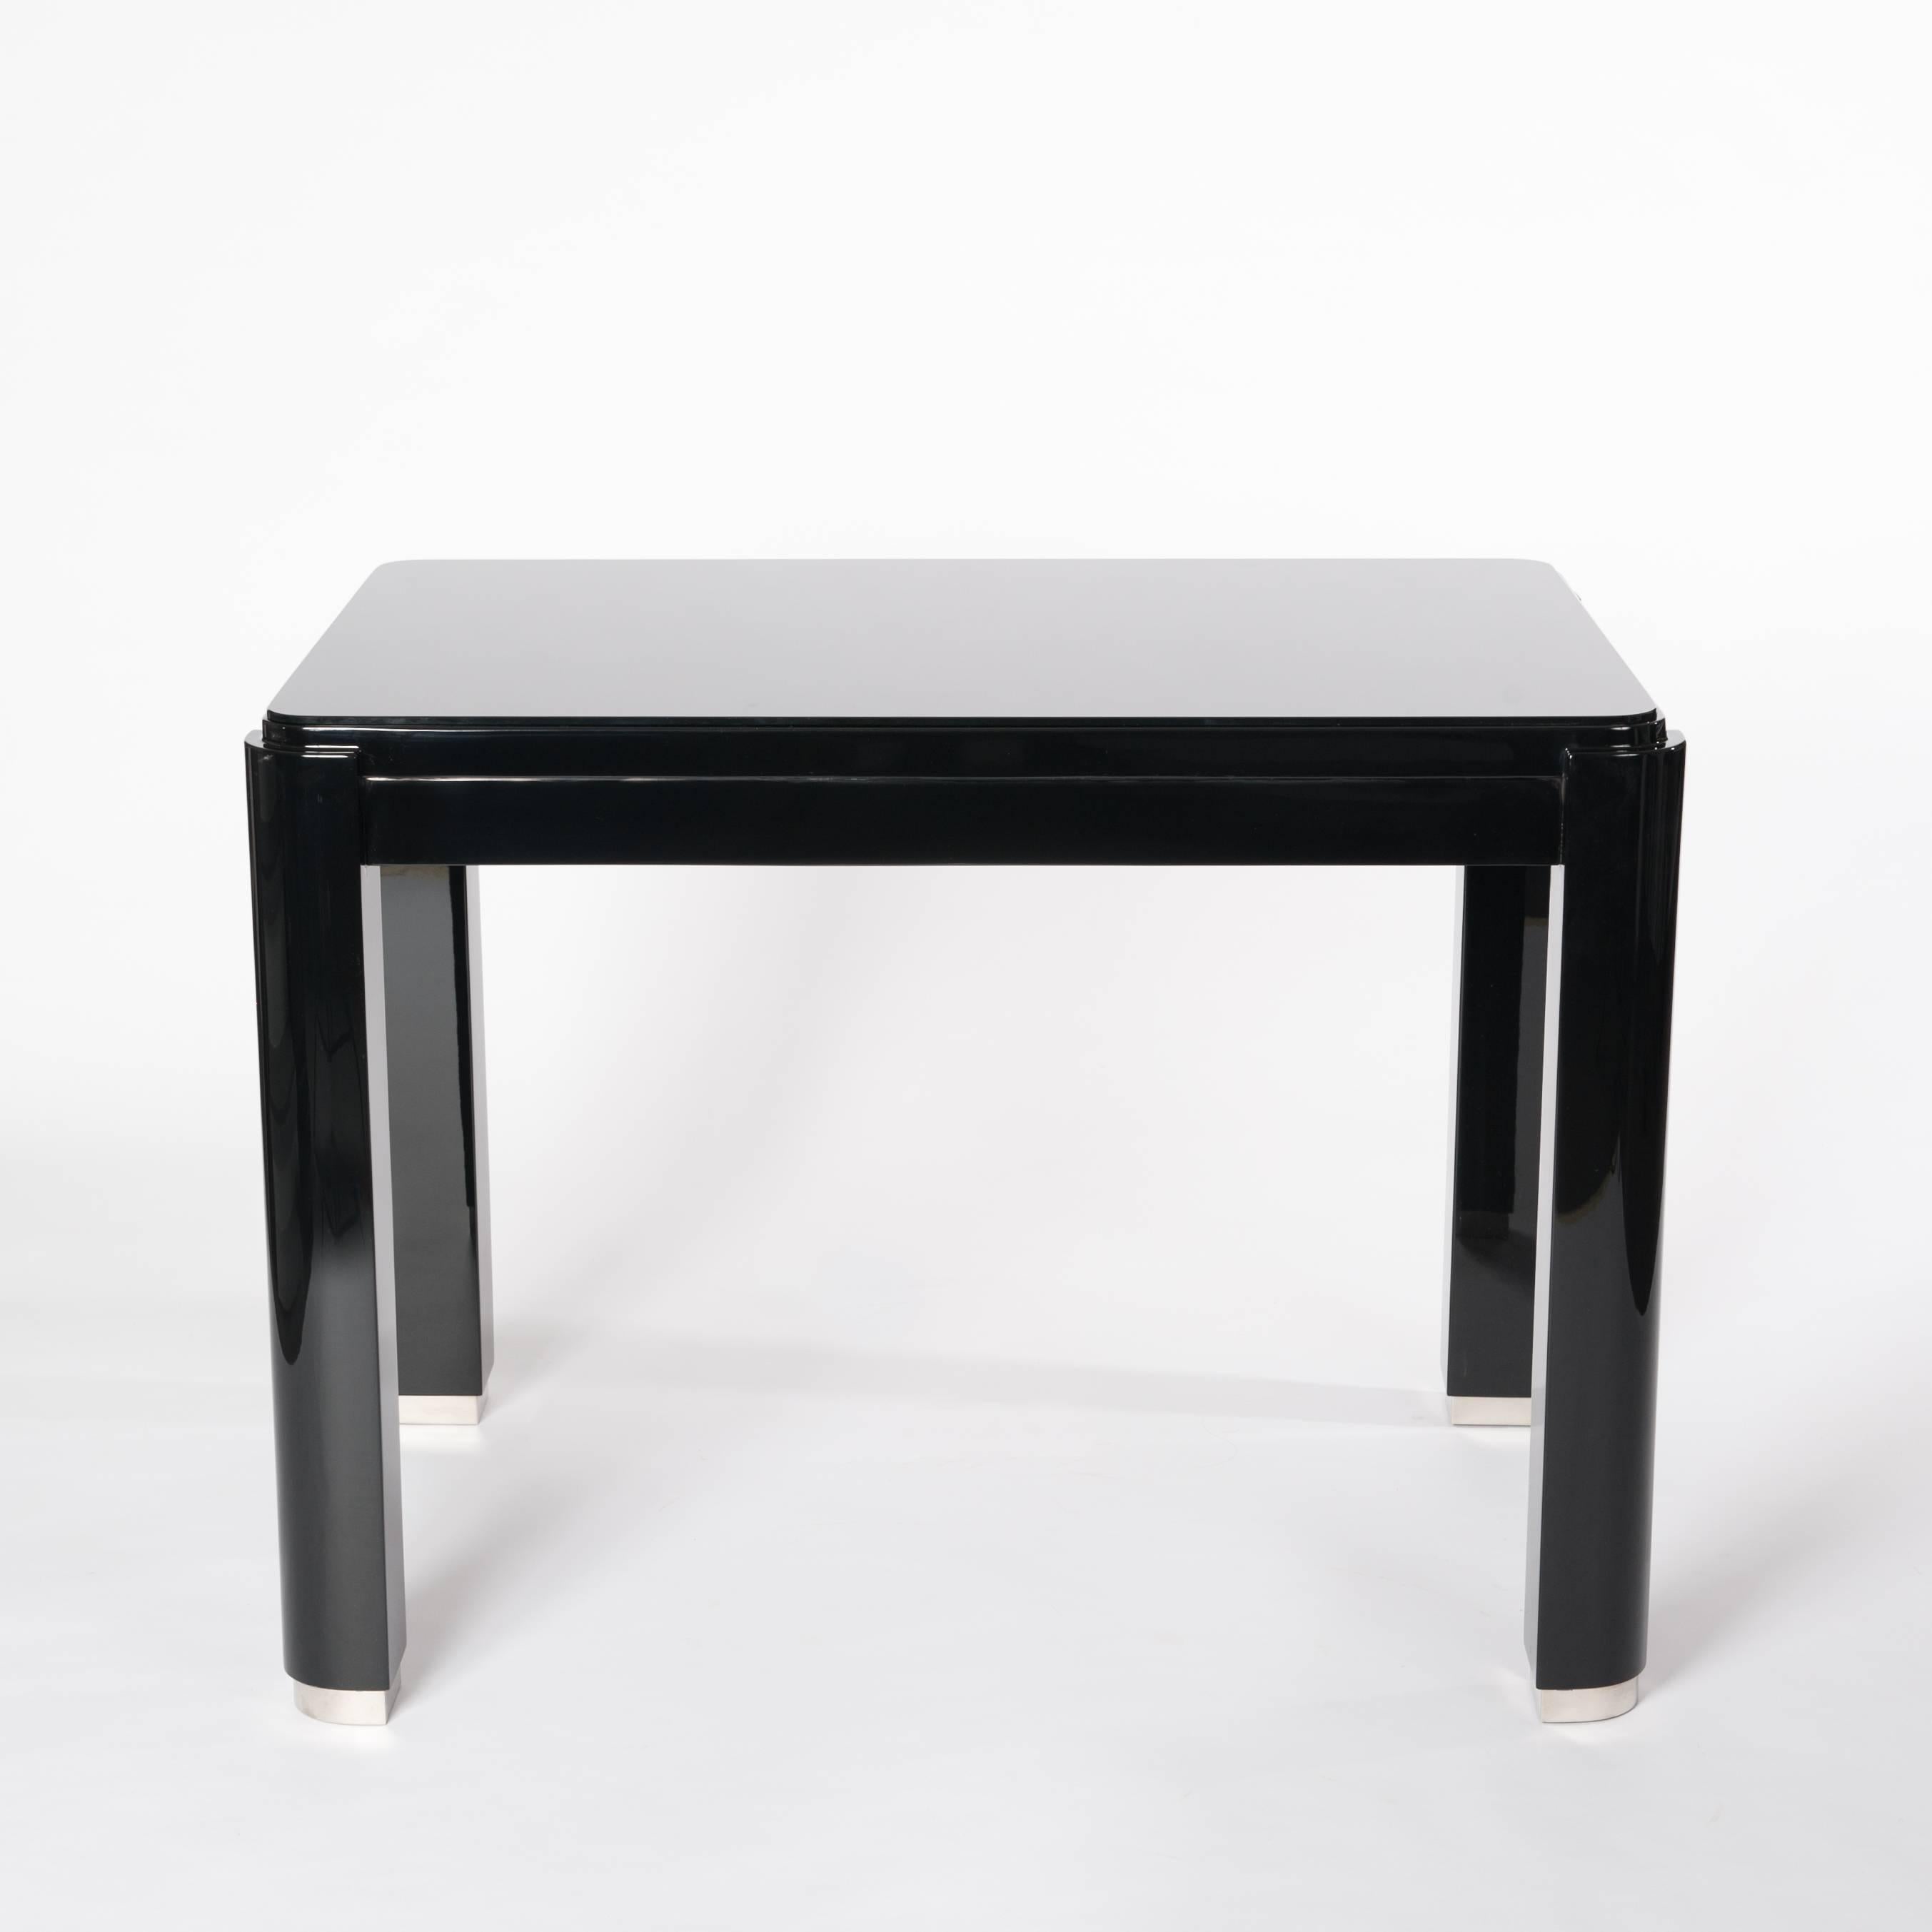 French Art Déco Cubistic Shaped Desk Black Lacquer with Re-Nickeled Hardware (Art déco)